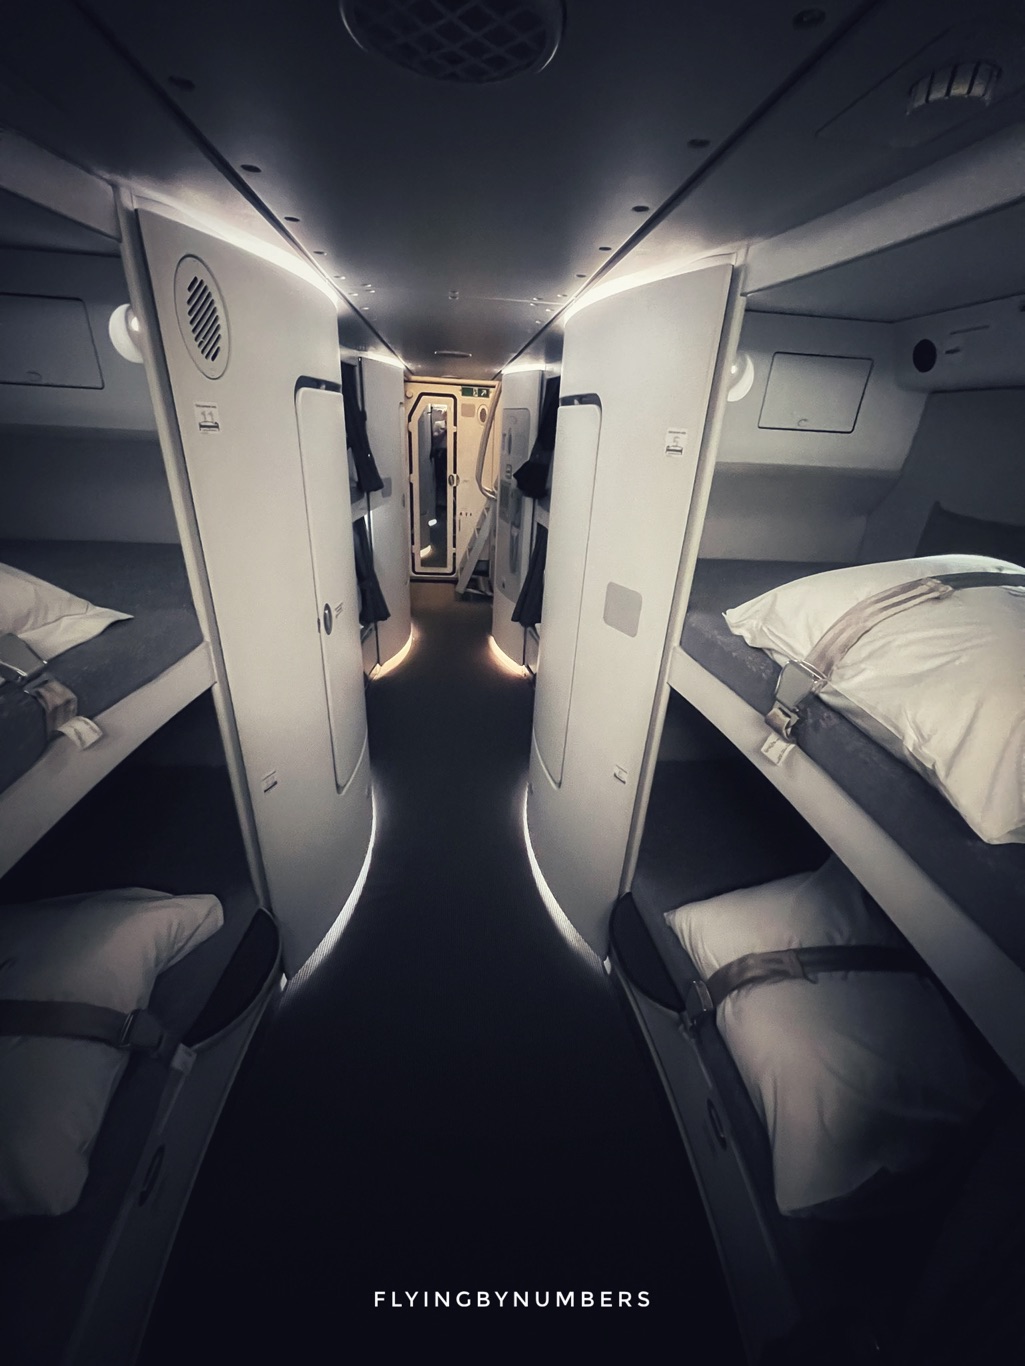 An inside look at class 1 cabin crew rest facilities